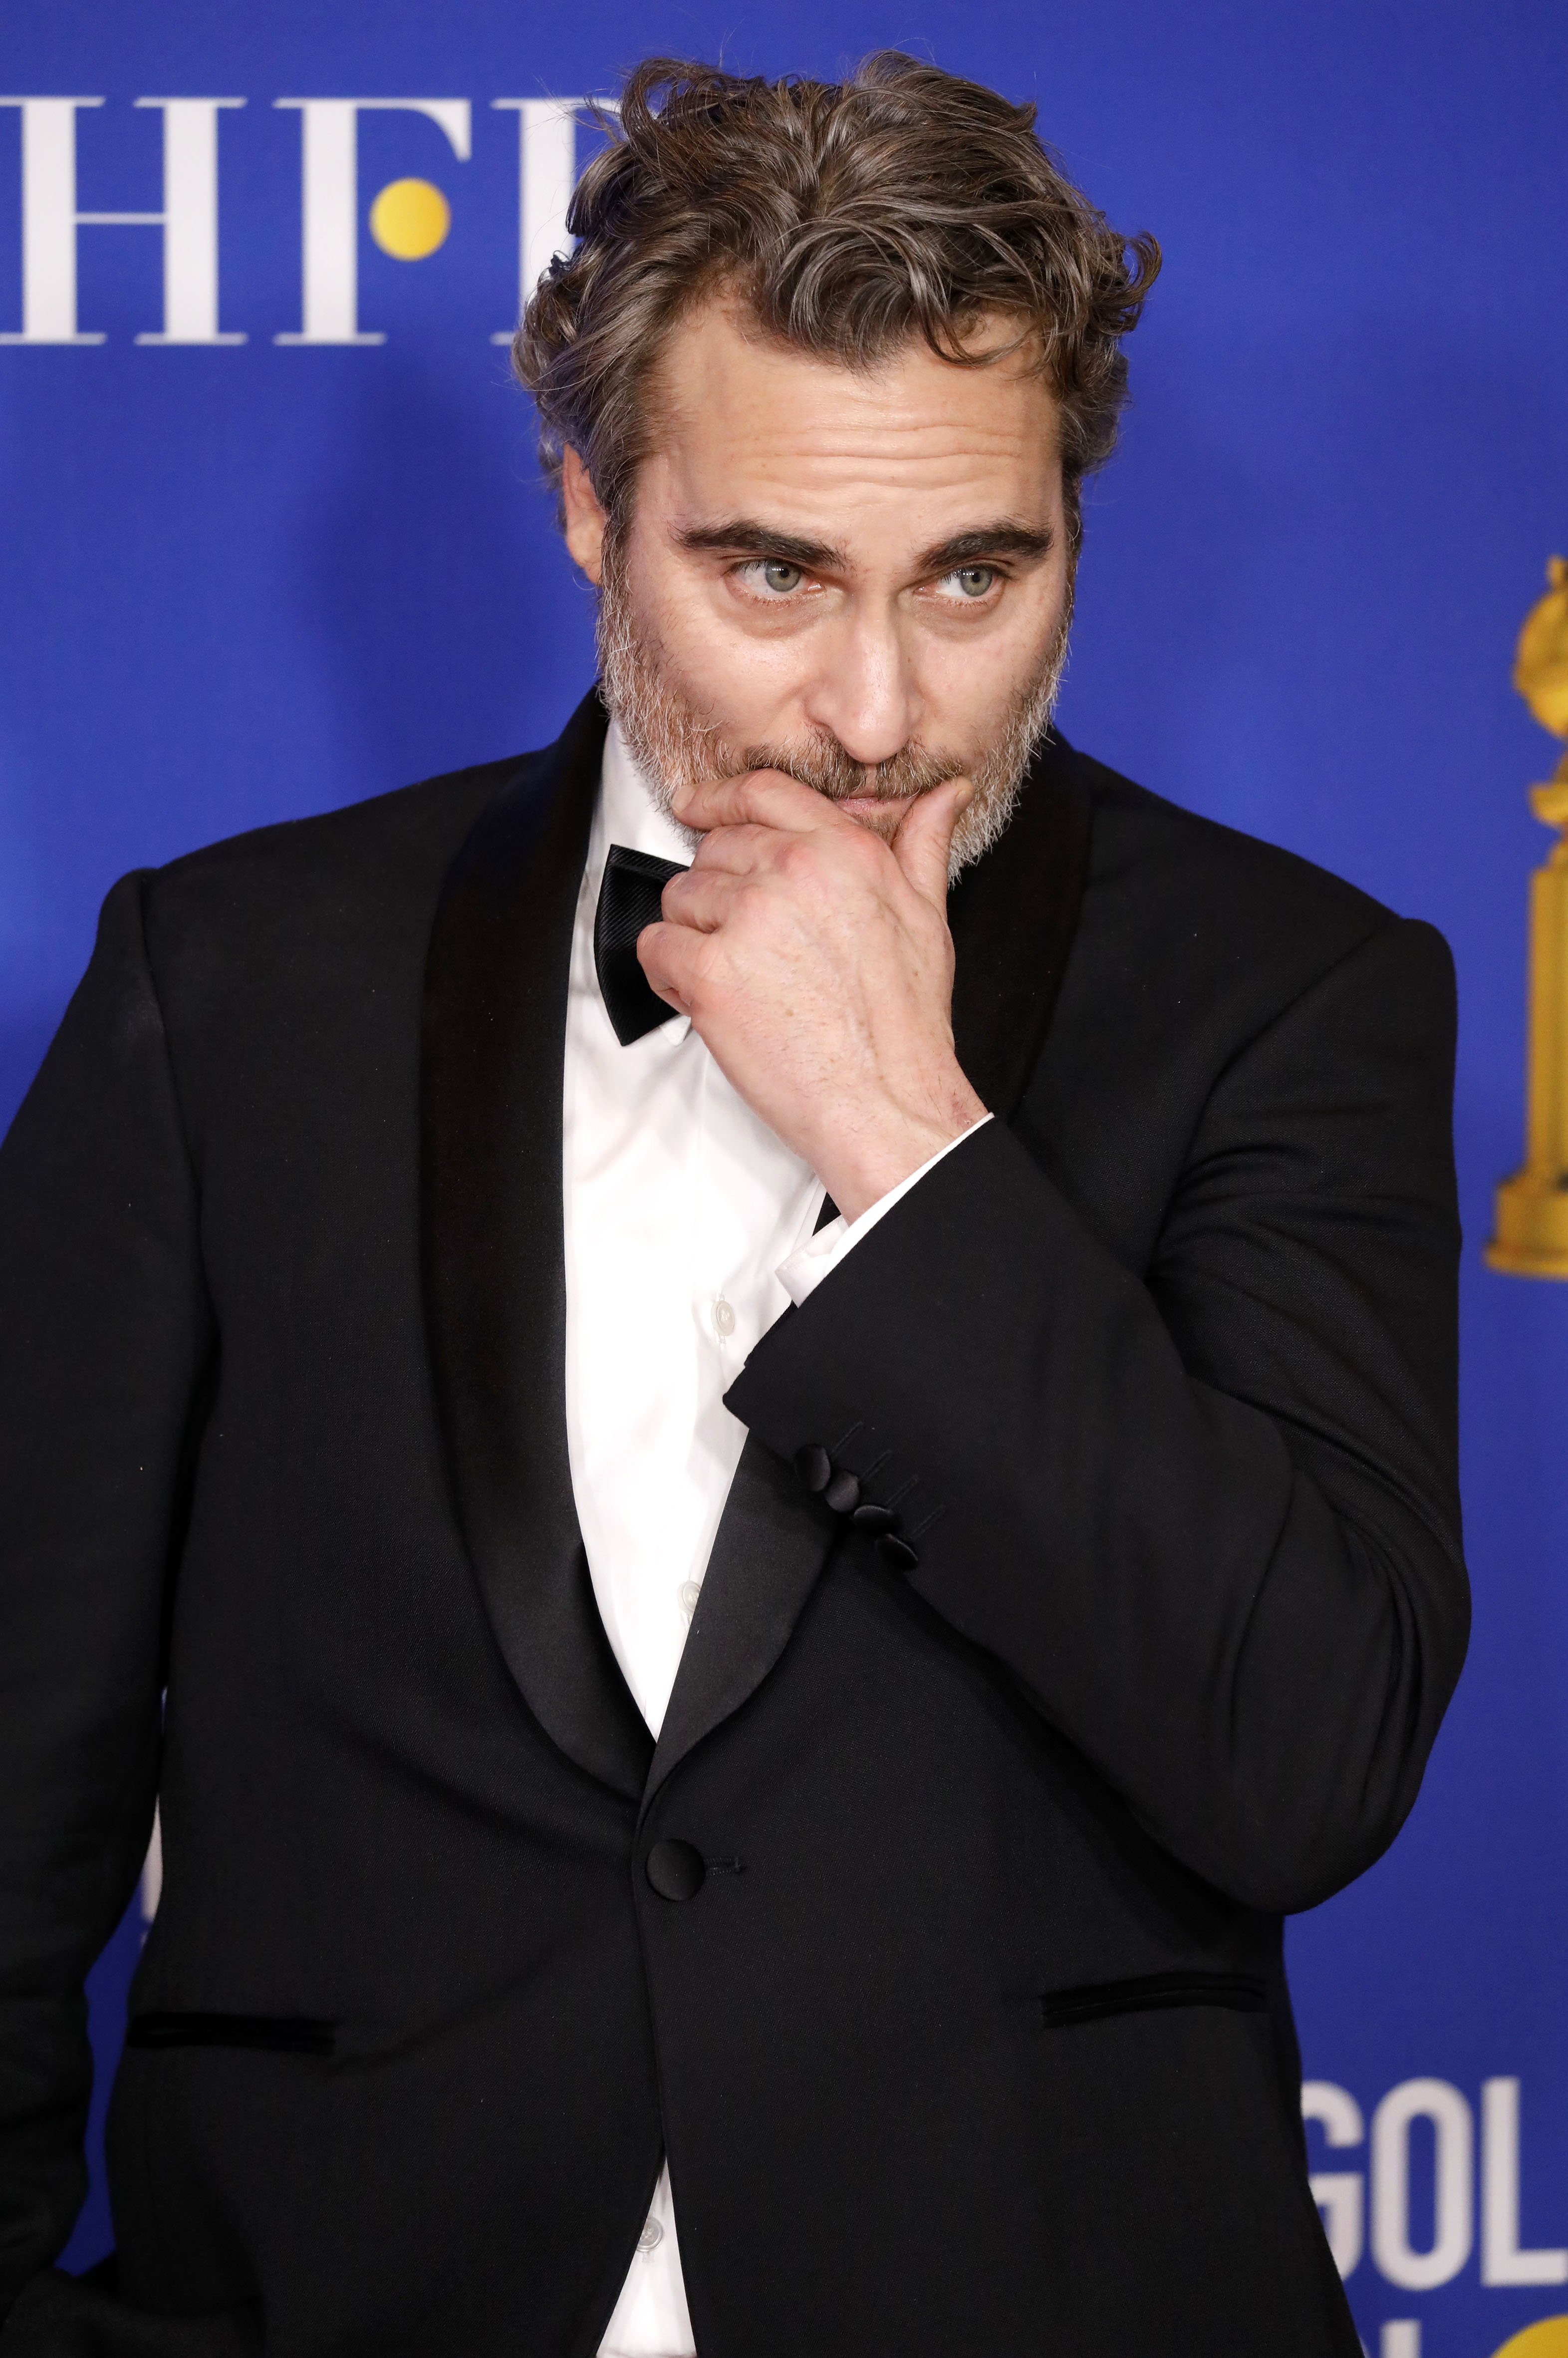 Joaquin Phoenix at the press room of the Golden Globe Awards in Beverly Hills, California on January 5, 2020 | Photo: Getty Images